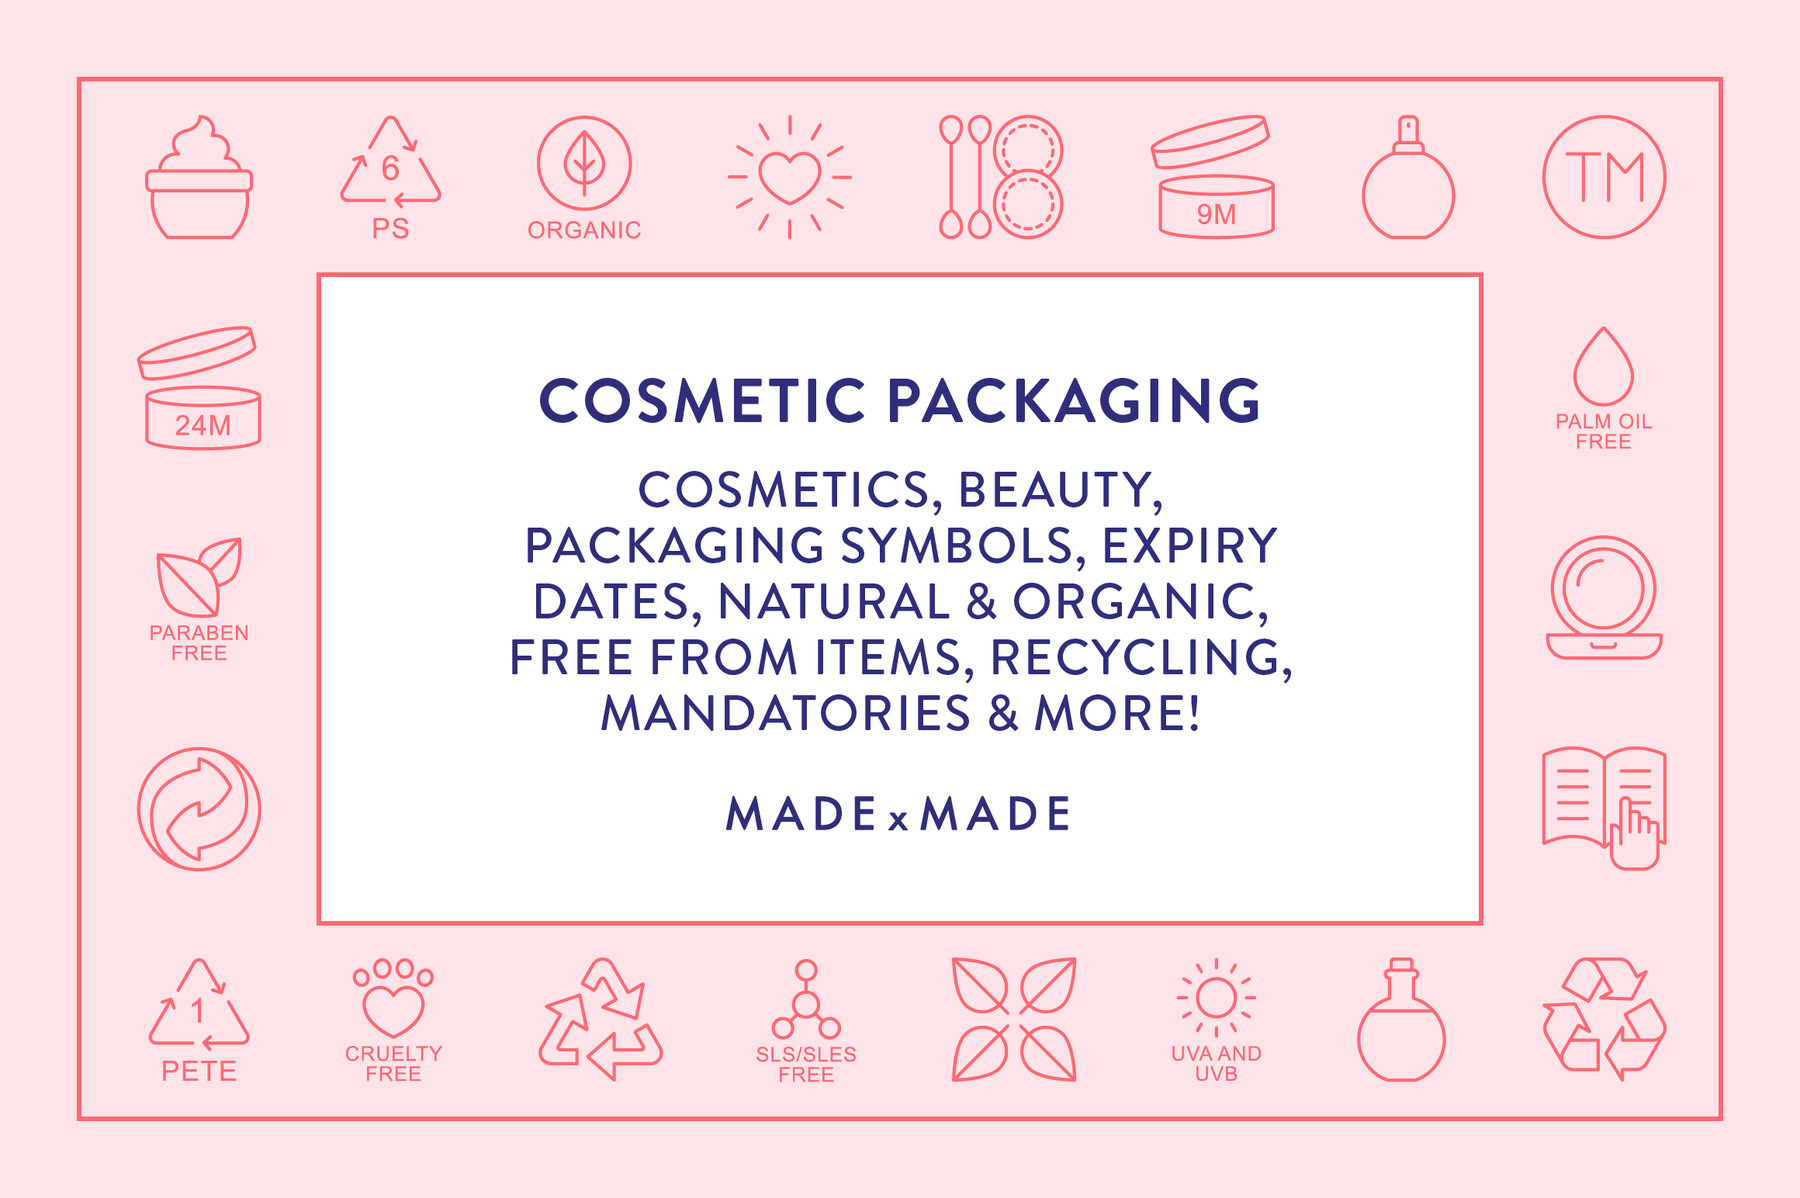 4x Packaging Icons Bundle